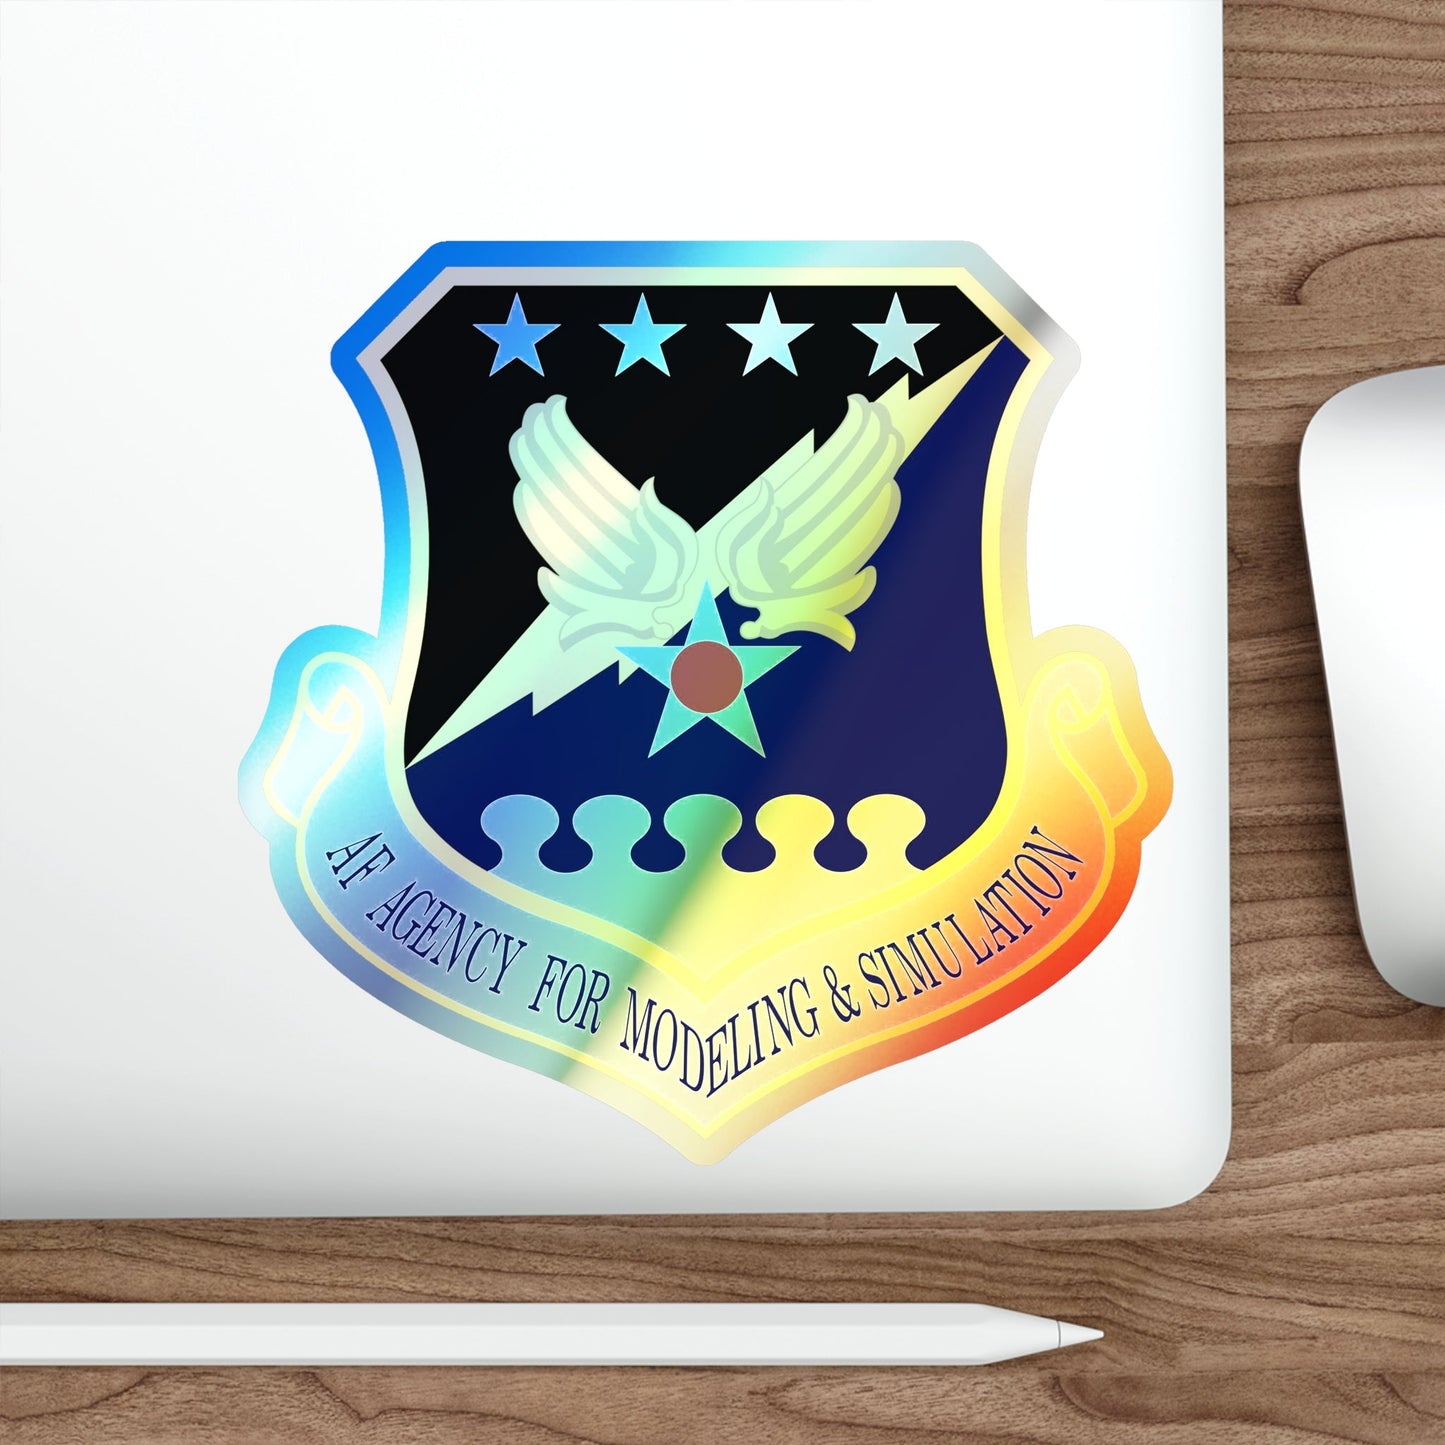 Air Force Agency for Modeling and Simulation (U.S. Air Force) Holographic STICKER Die-Cut Vinyl Decal-The Sticker Space